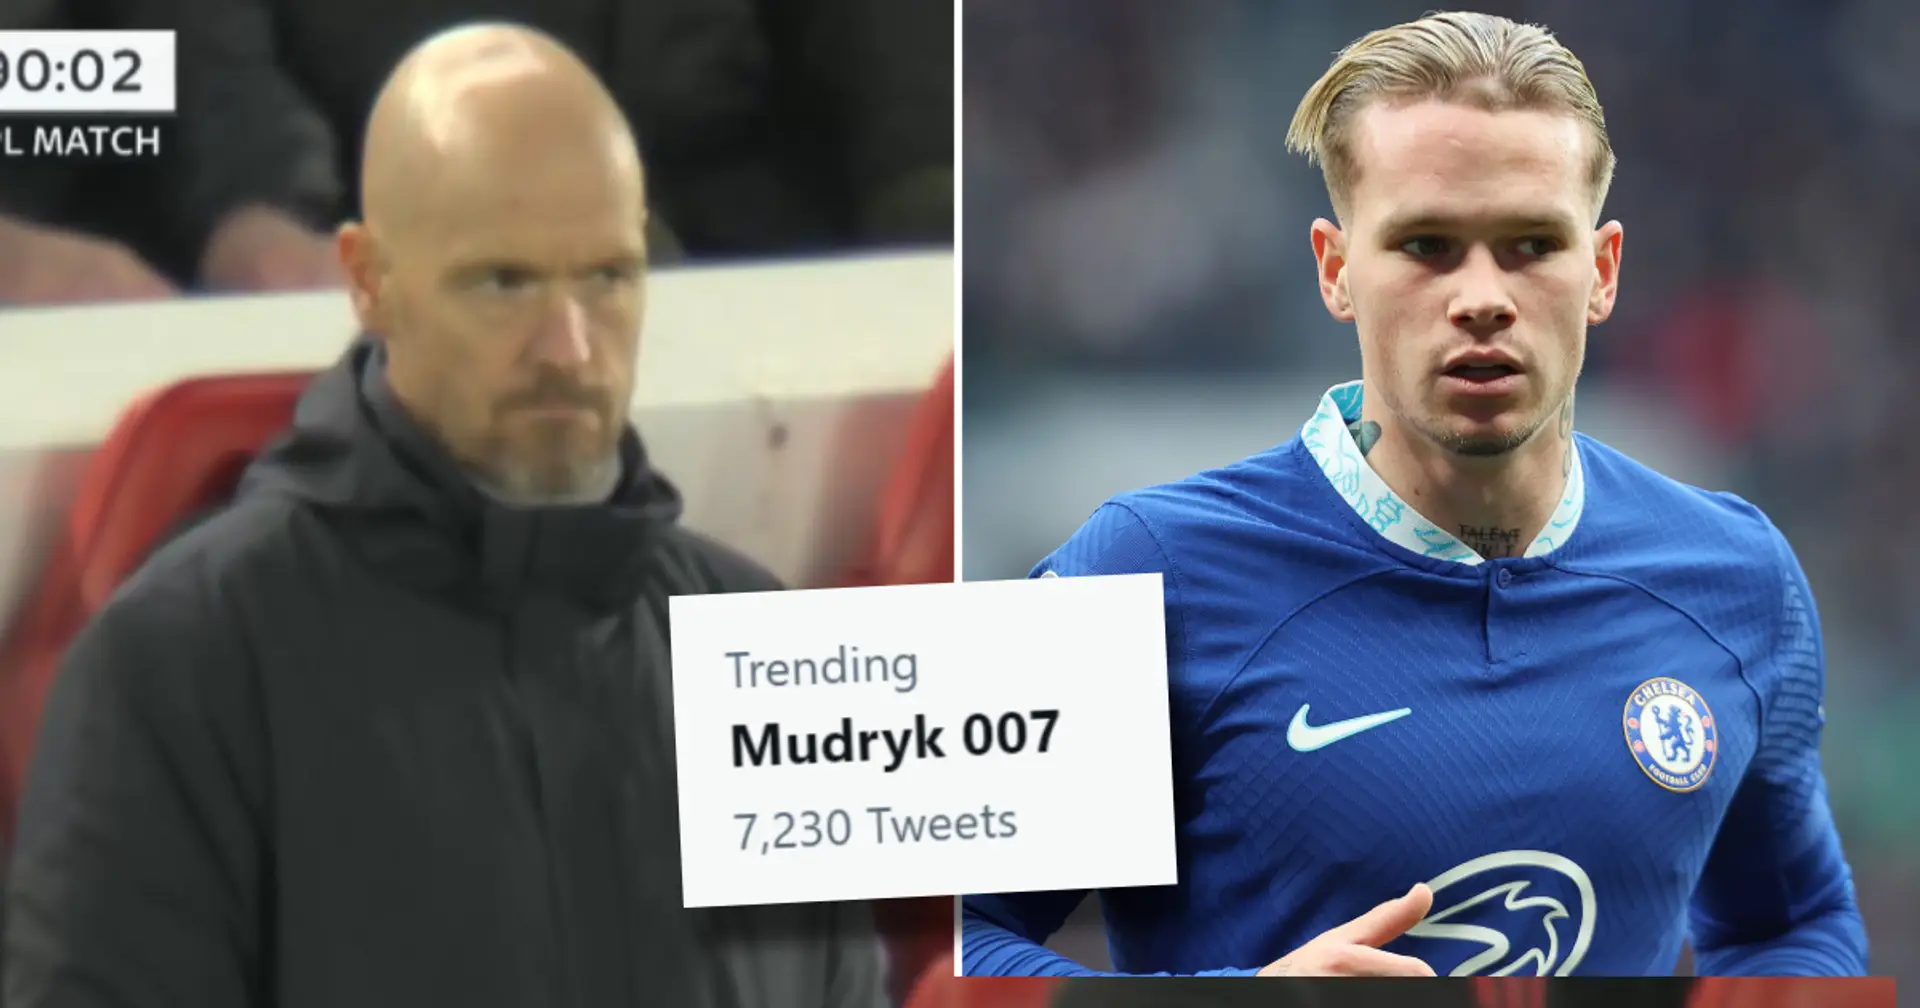 Why 'Mudryk 007' trends on social media after Man United disgrace themselves at Anfield - explained